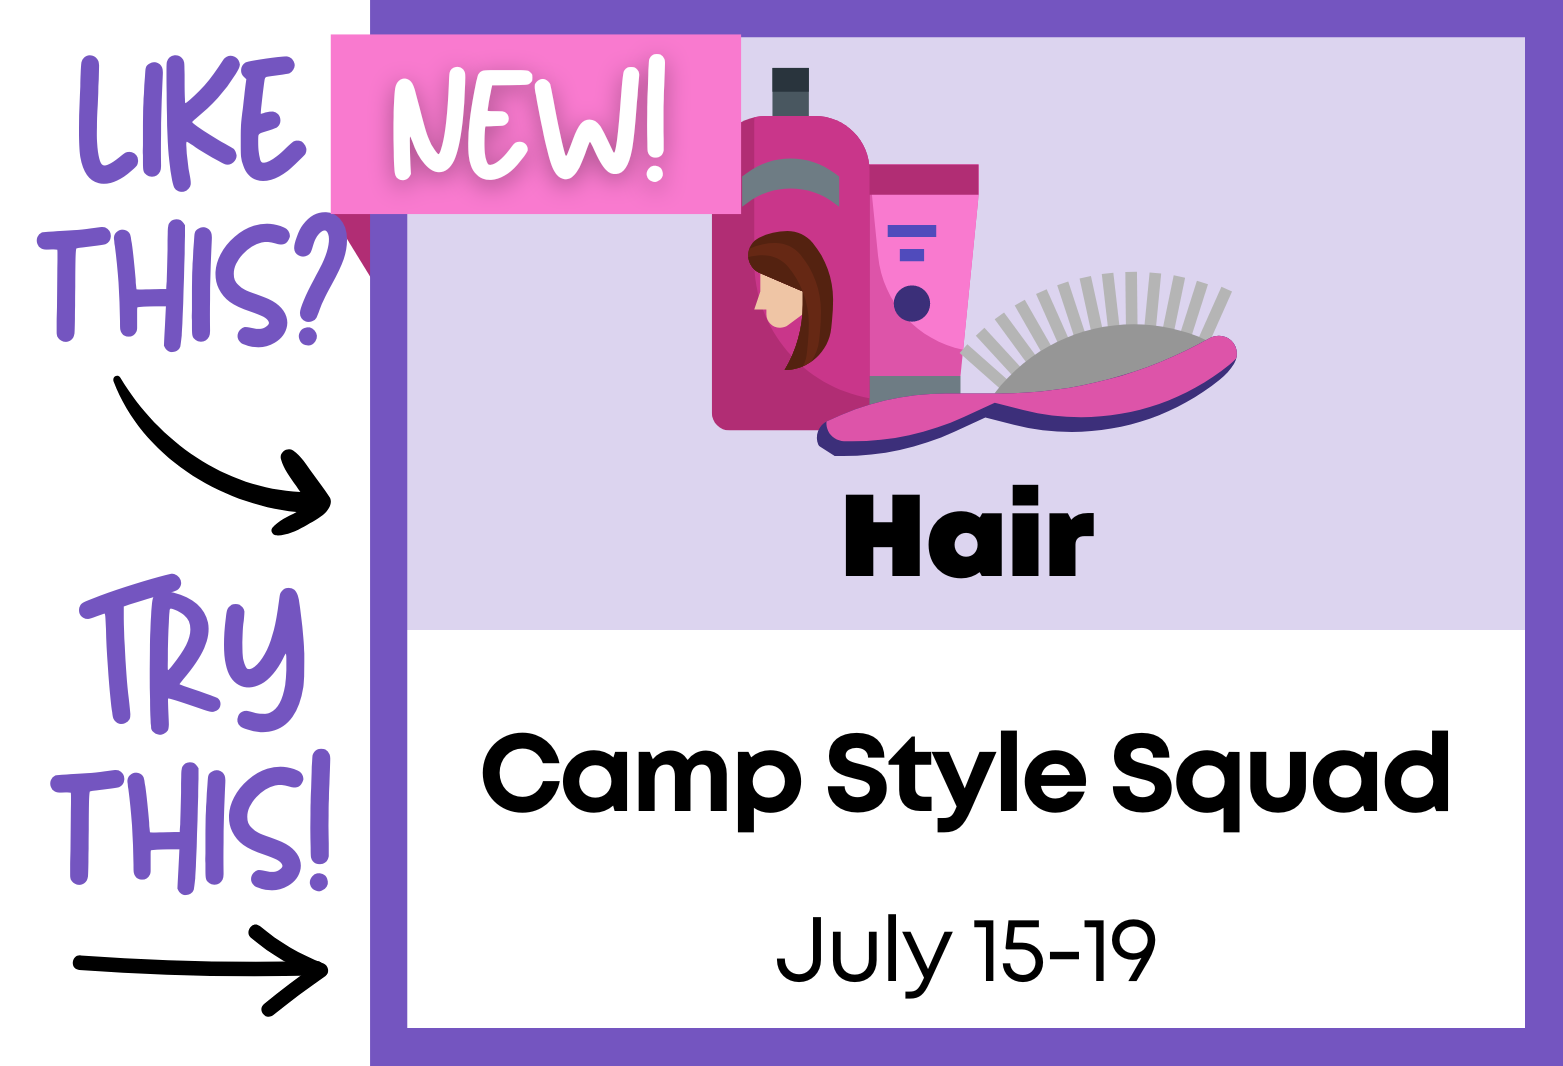 Camp Style Squad, July 15-19